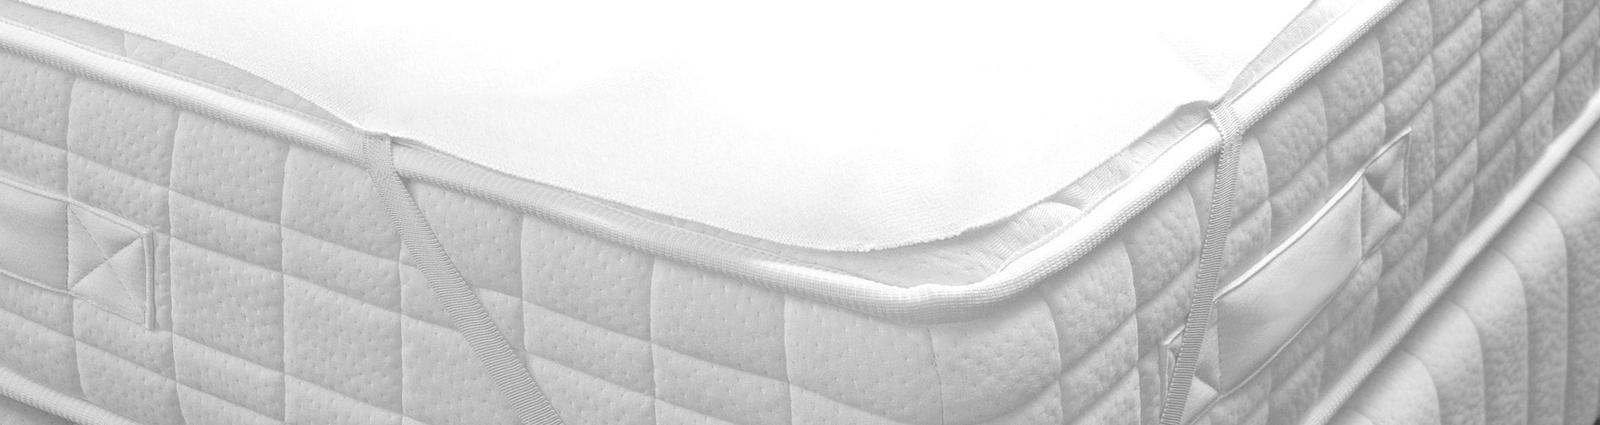 To protect your hotel bedding (mattresses, pillows and duvets) and thus ensure a better lifespan, it is strongly recommended to use mattress protectors or mattress protectors, pillow protectors or pillow mattress protectors or comforters. These protections will not only allow you to offer your customers clean and healthy bedding, prevent stains and certain degradations (liquids that fall ...) thanks to their waterproof properties and will also be much easier to maintain than a mattress, quilt or pillows since these protective covers are machine washable.